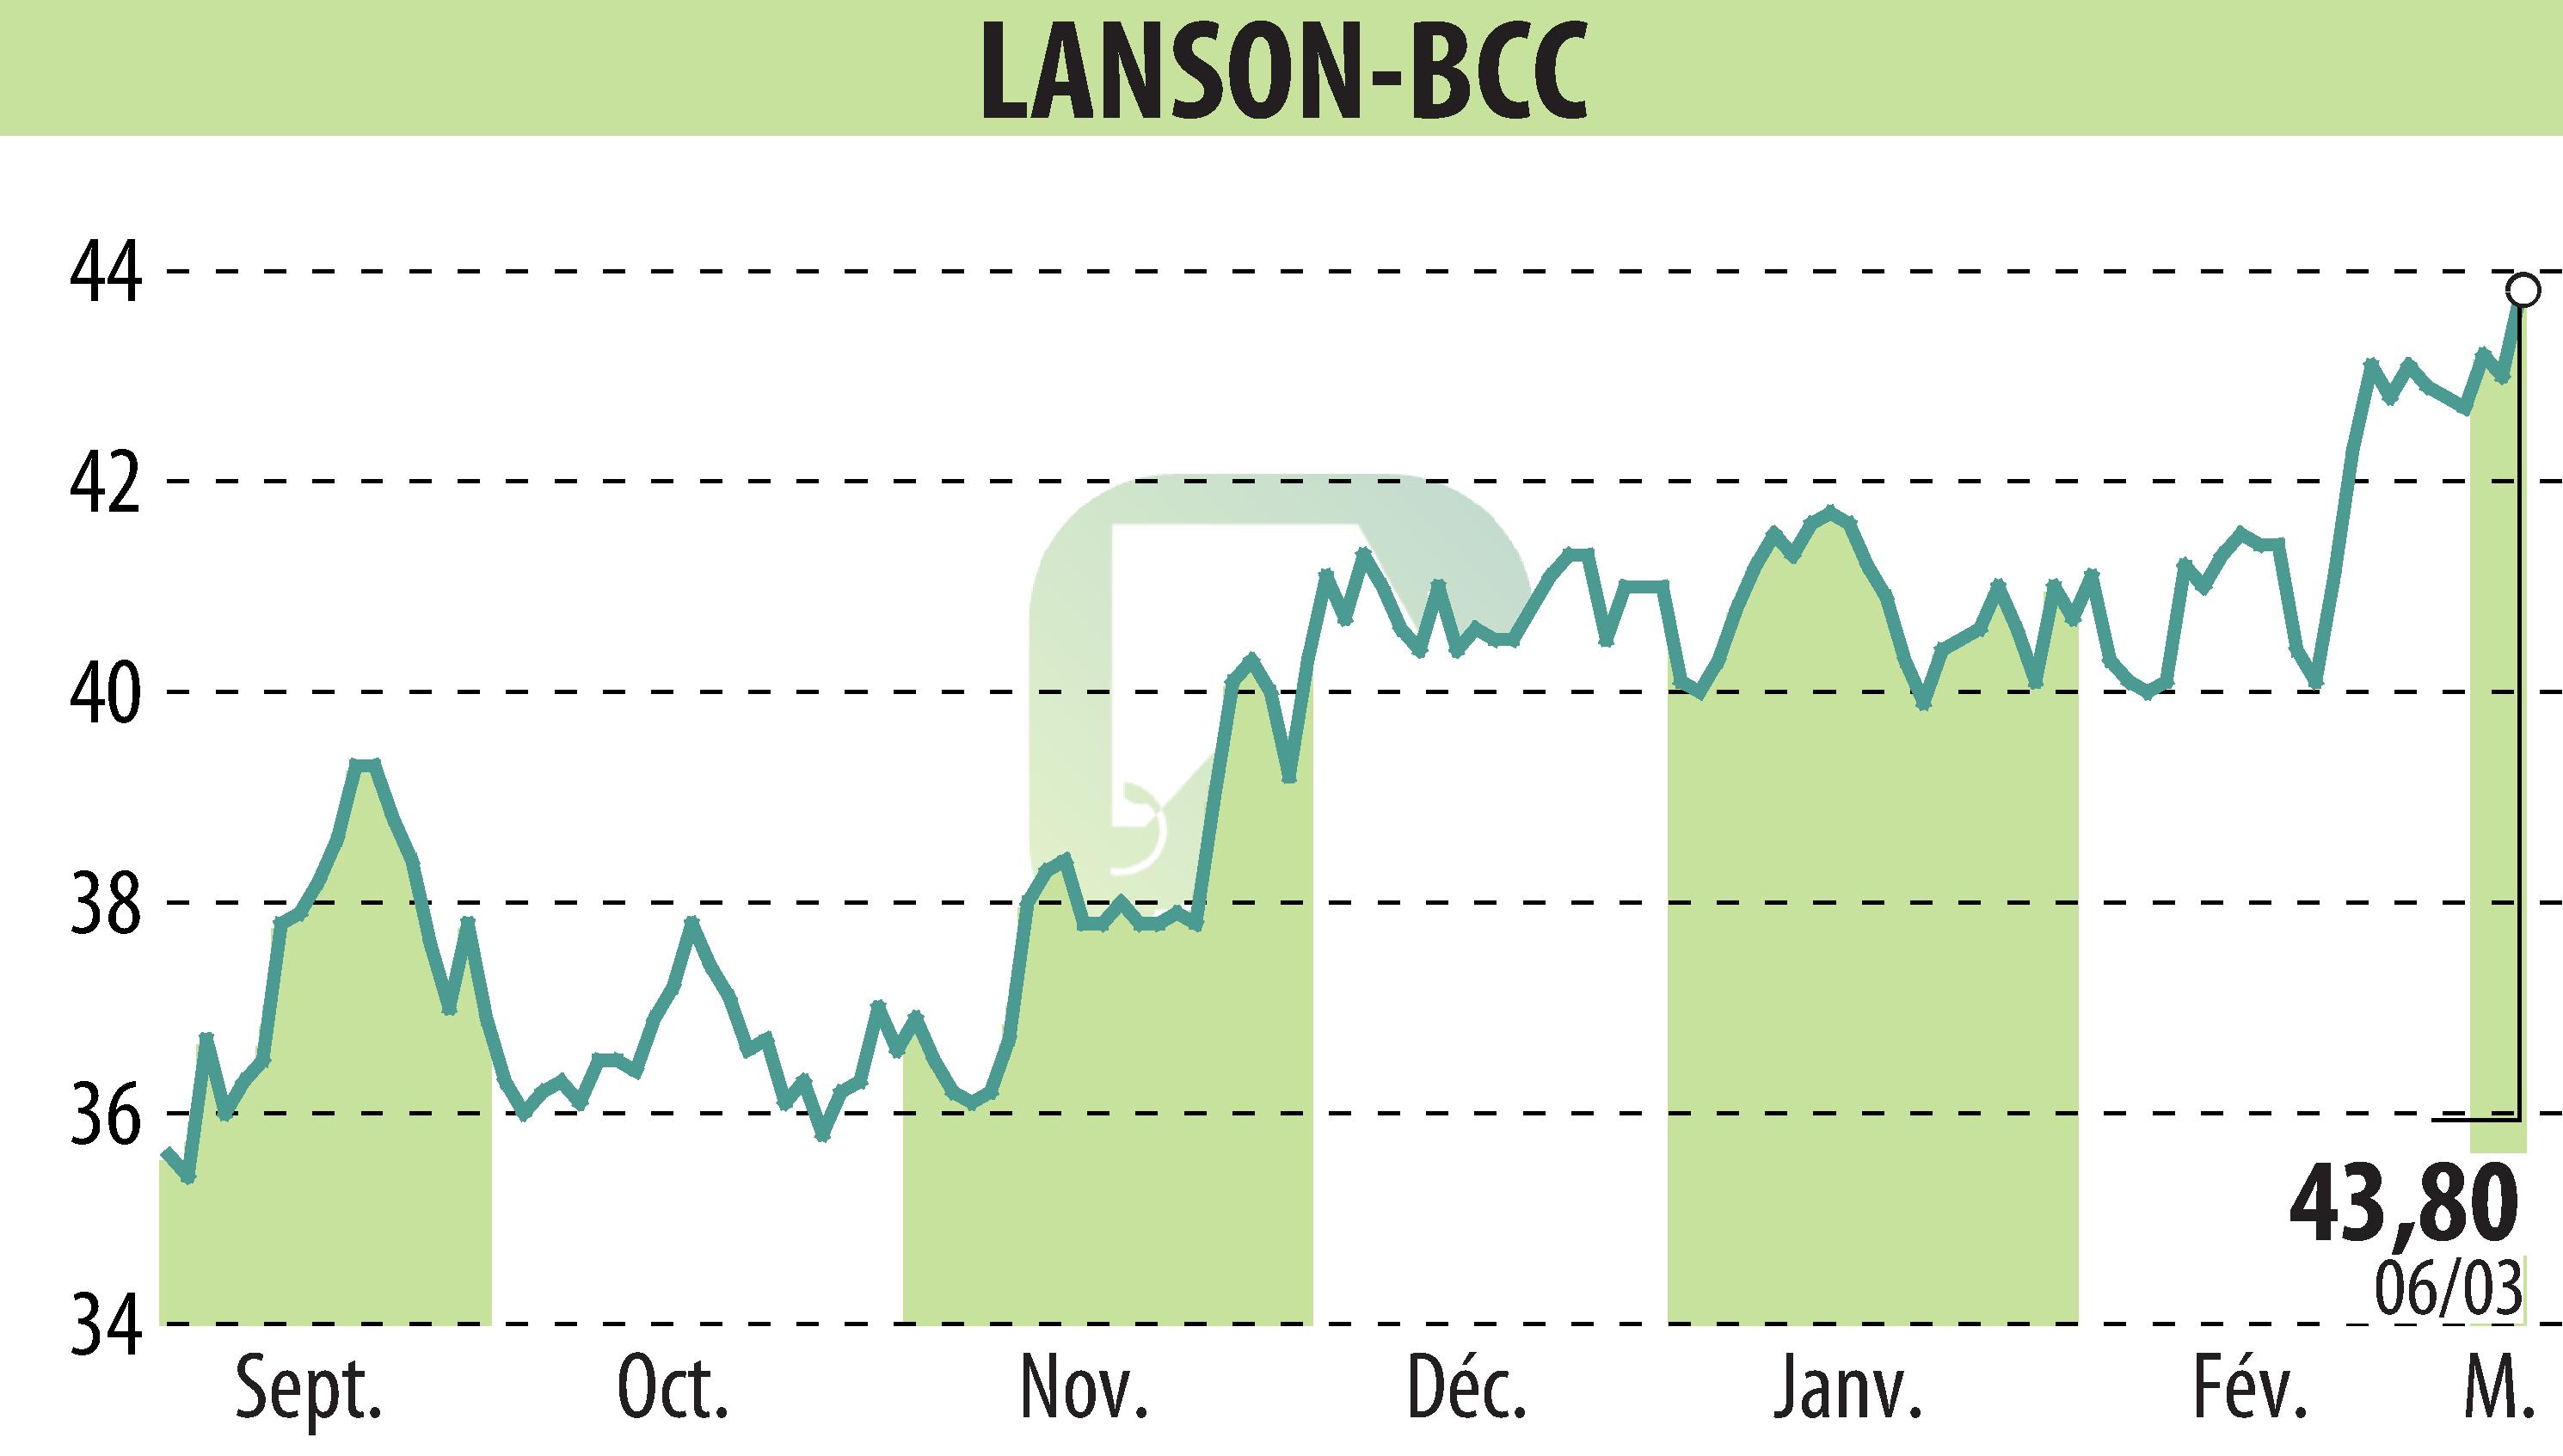 Stock price chart of LANSON-BCC (EPA:ALLAN) showing fluctuations.